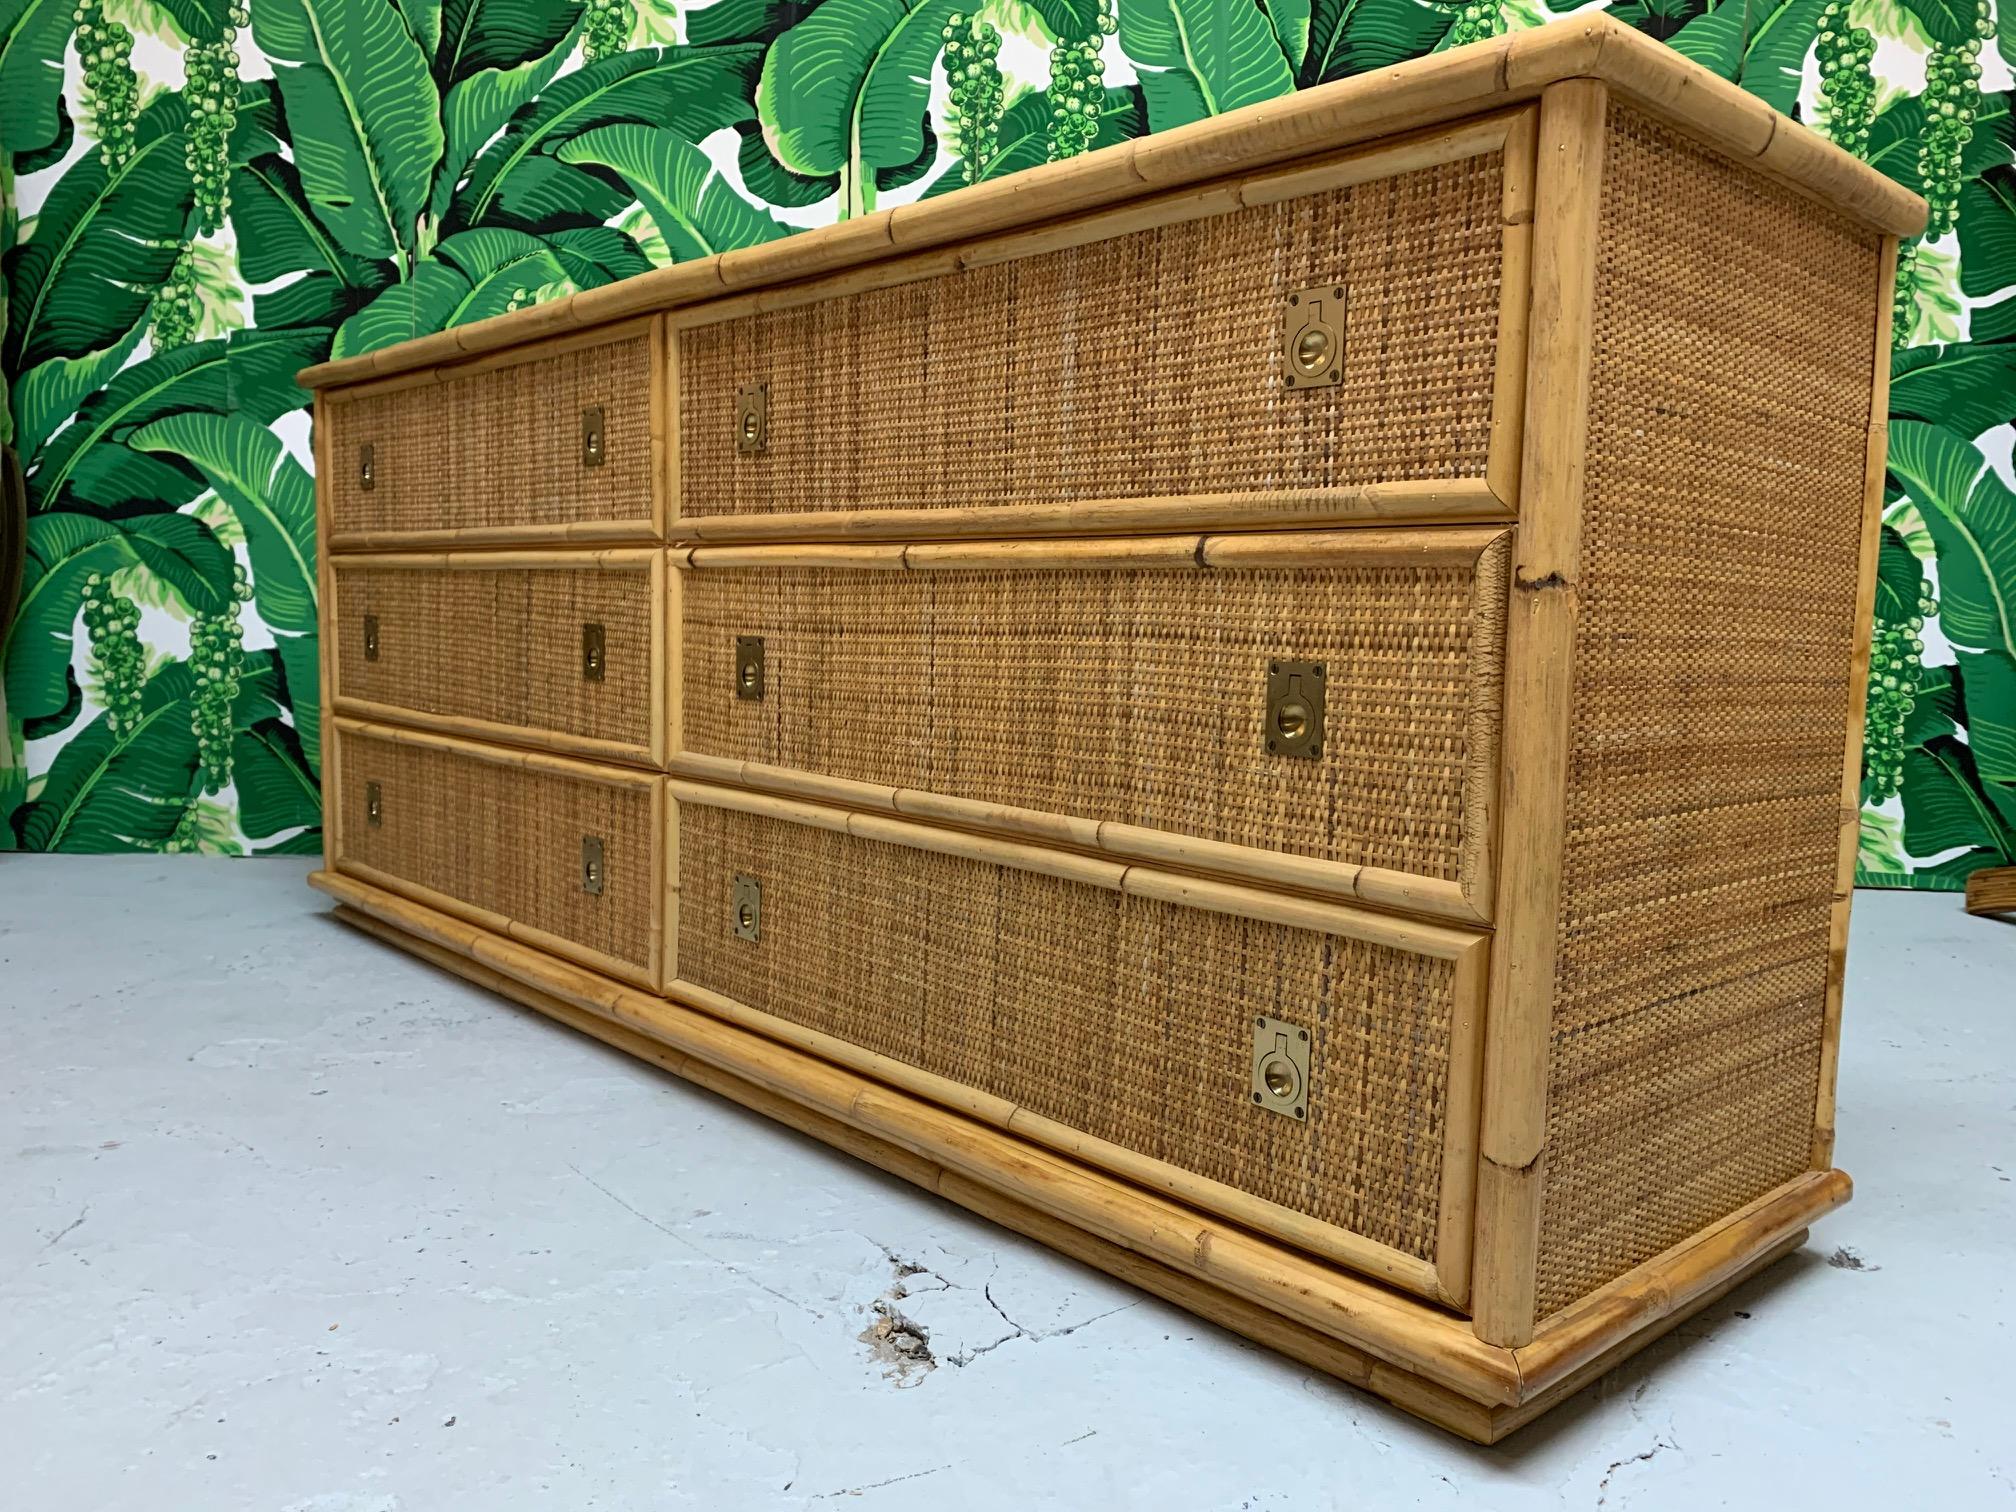 Double dresser features bamboo detailing and woven rattan wrapped surfaces. Brass hardware adds a Hollywood Regency touch. Very good condition with very minor imperfections consistent with age.